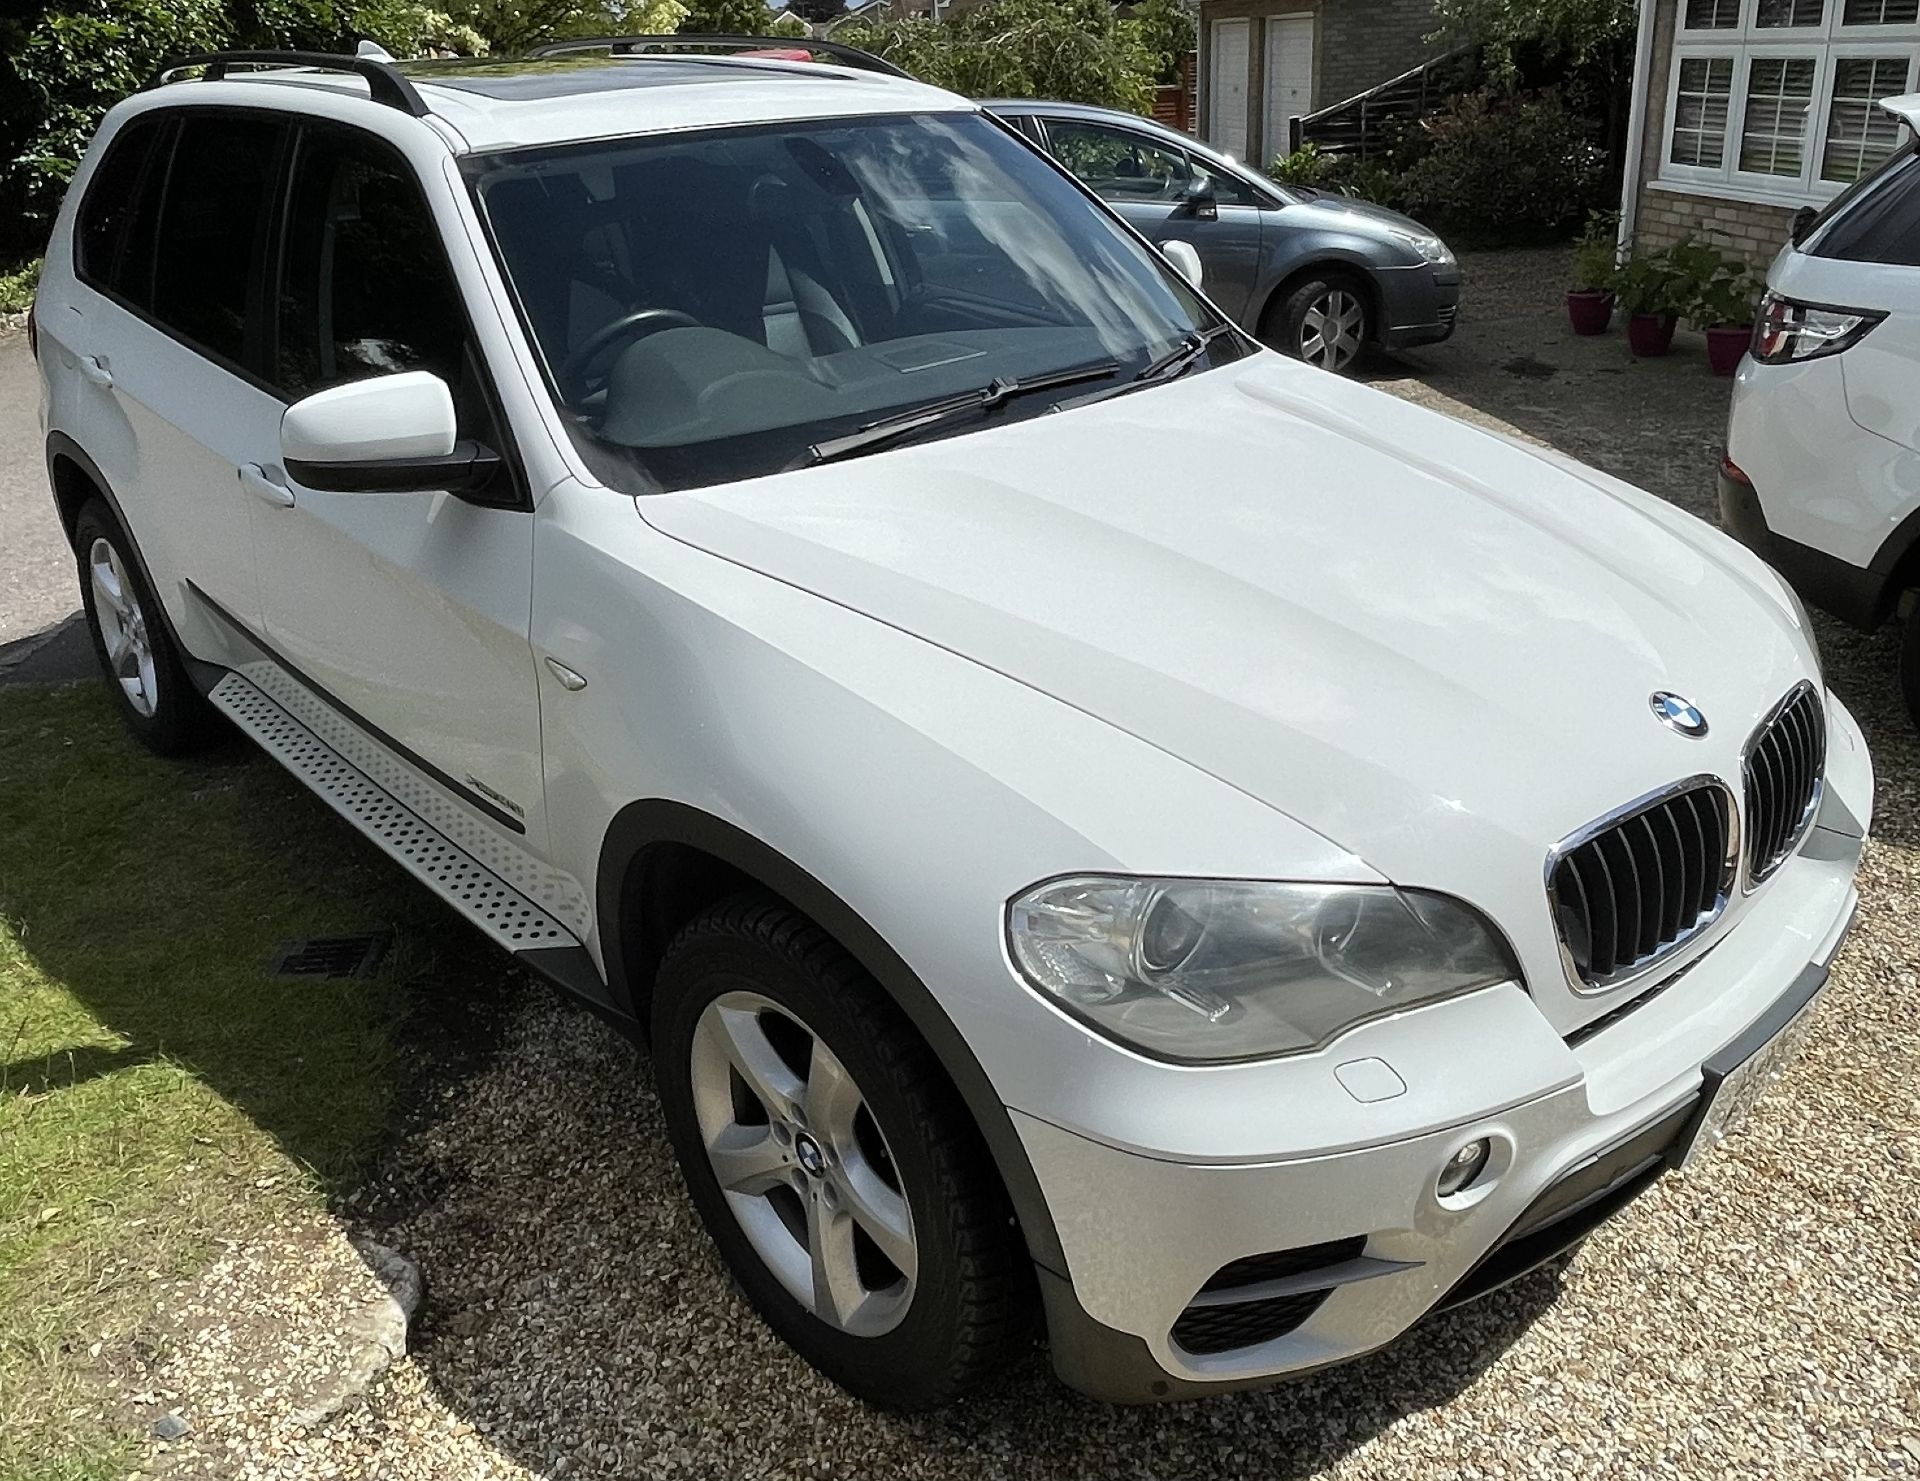 2010 BMW X5 Xdrive 35i - Petrol ULEZ complient. 3.0 Litre twin turbo. Low mileage. Leather interior - Image 3 of 21